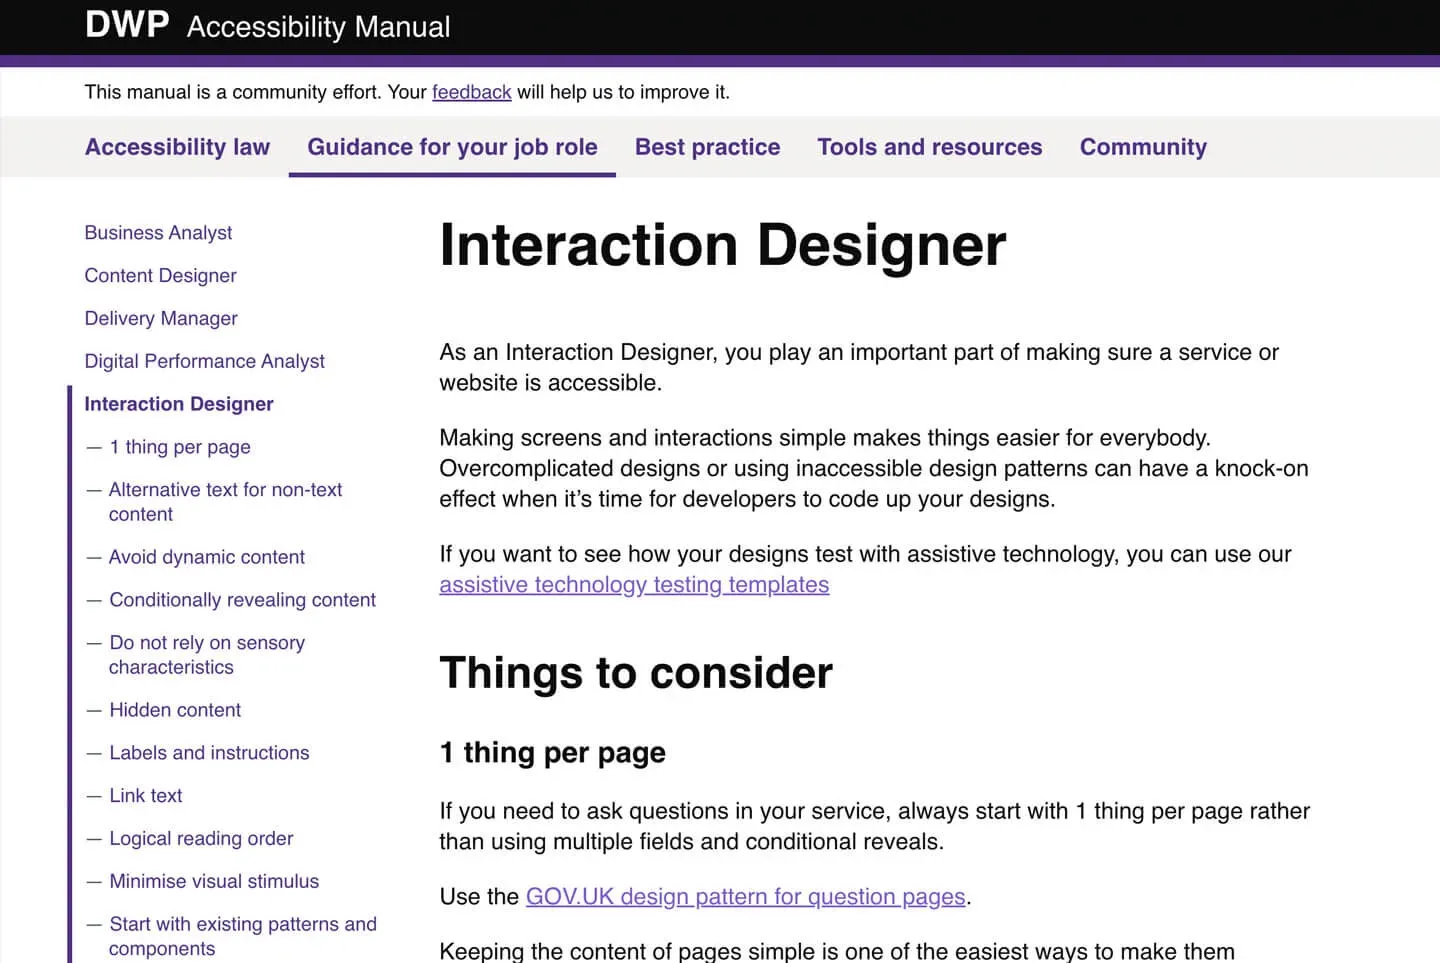 The guidance for your job role page for an Interaction Designer in the DWP Accessibility Manual.